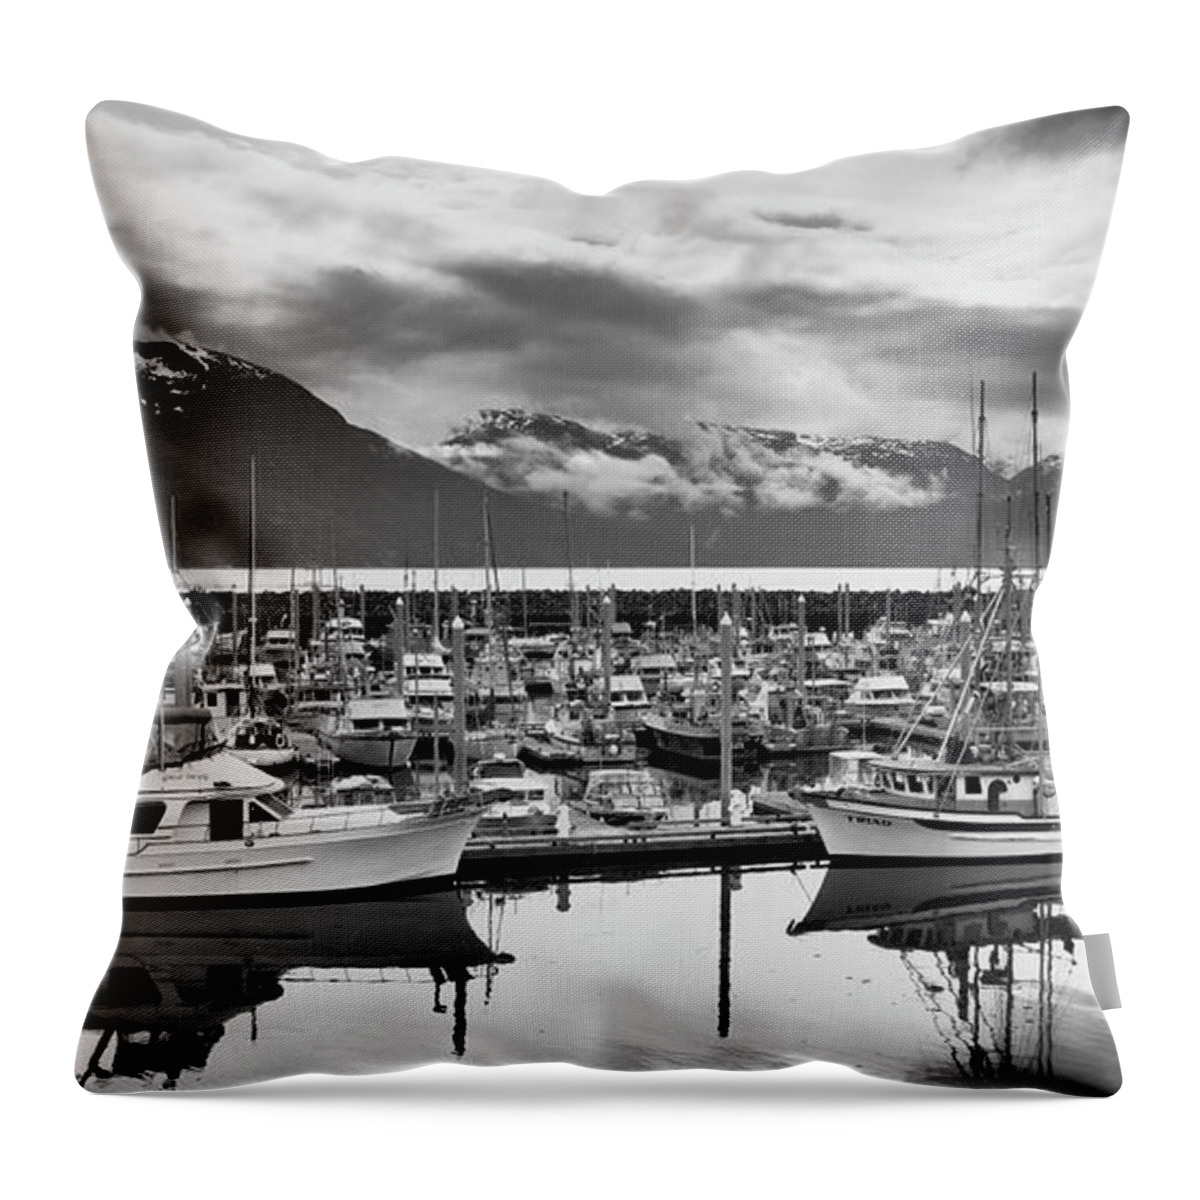 Haines Throw Pillow featuring the photograph Haines Harbor by Paul Riedinger